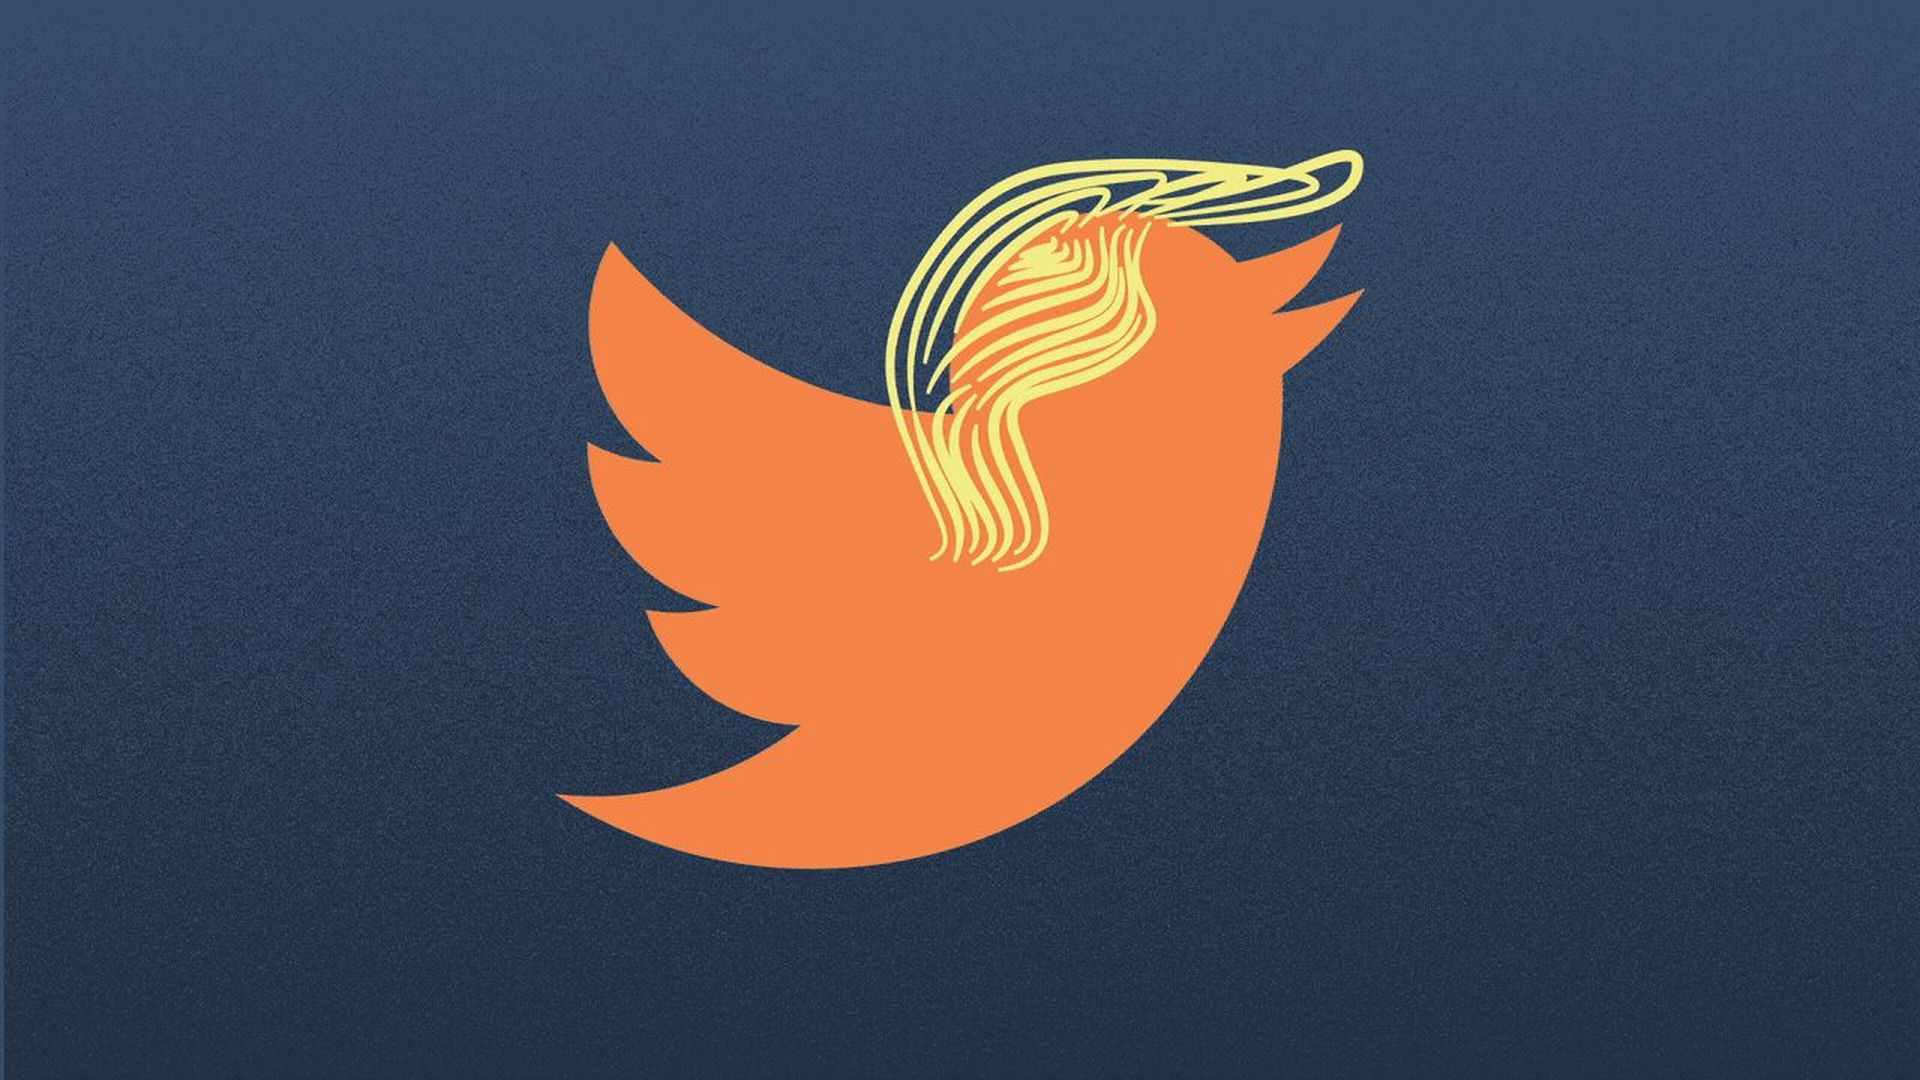 Illustration of an orange Twitter logo with hair like Donald Trump's.